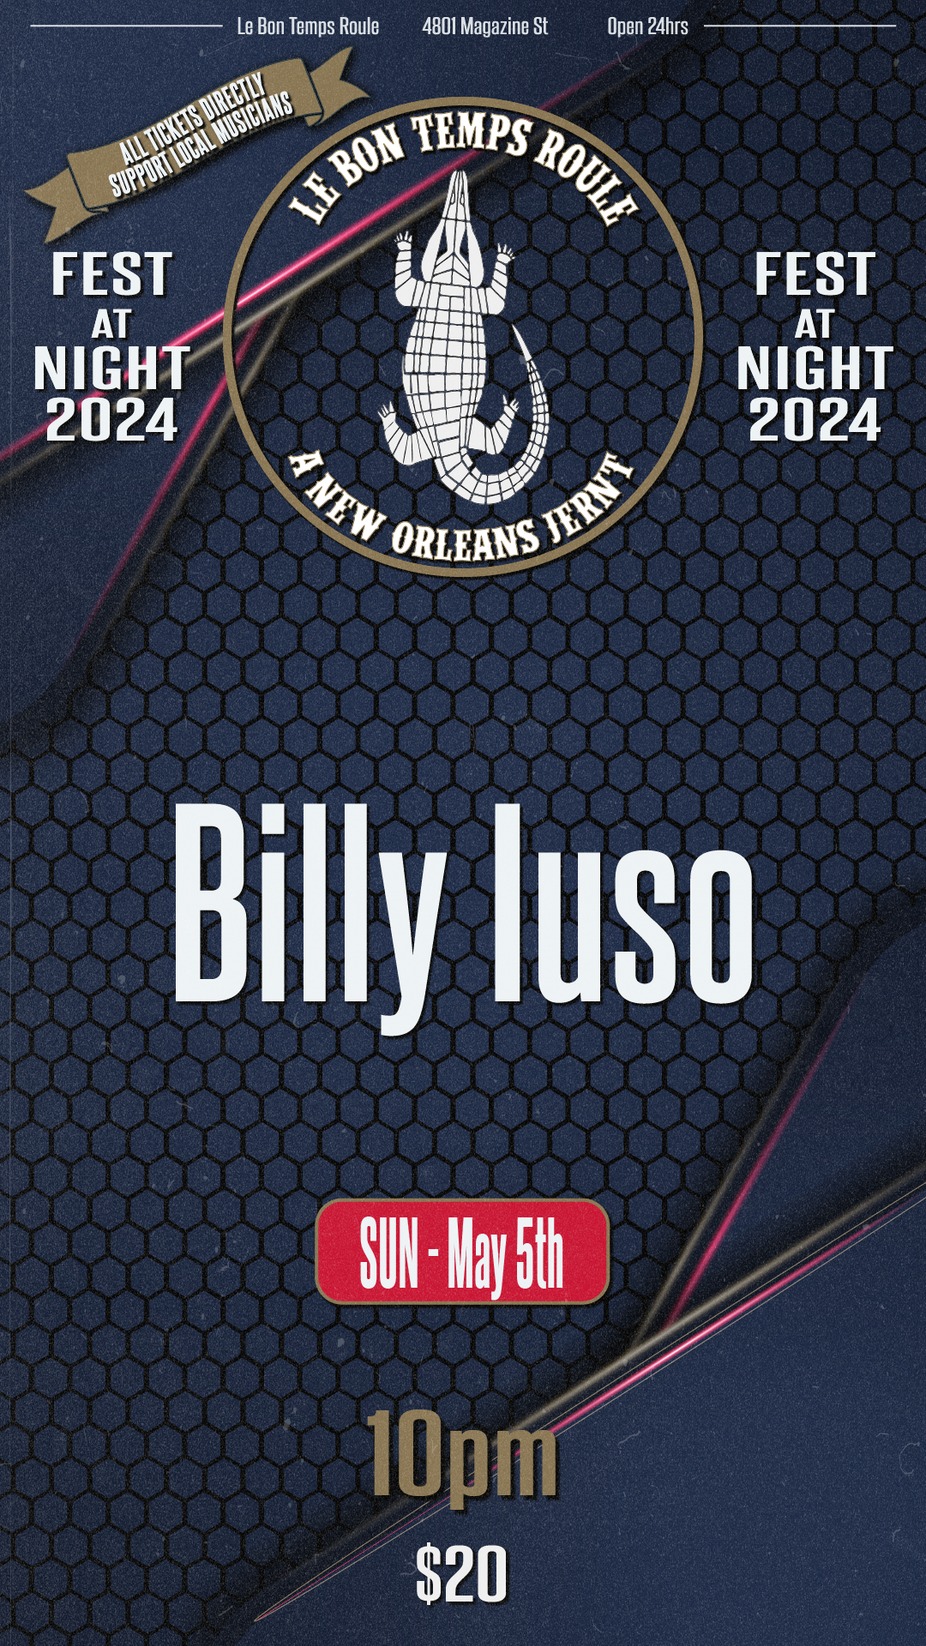 Billy Iuso event photo